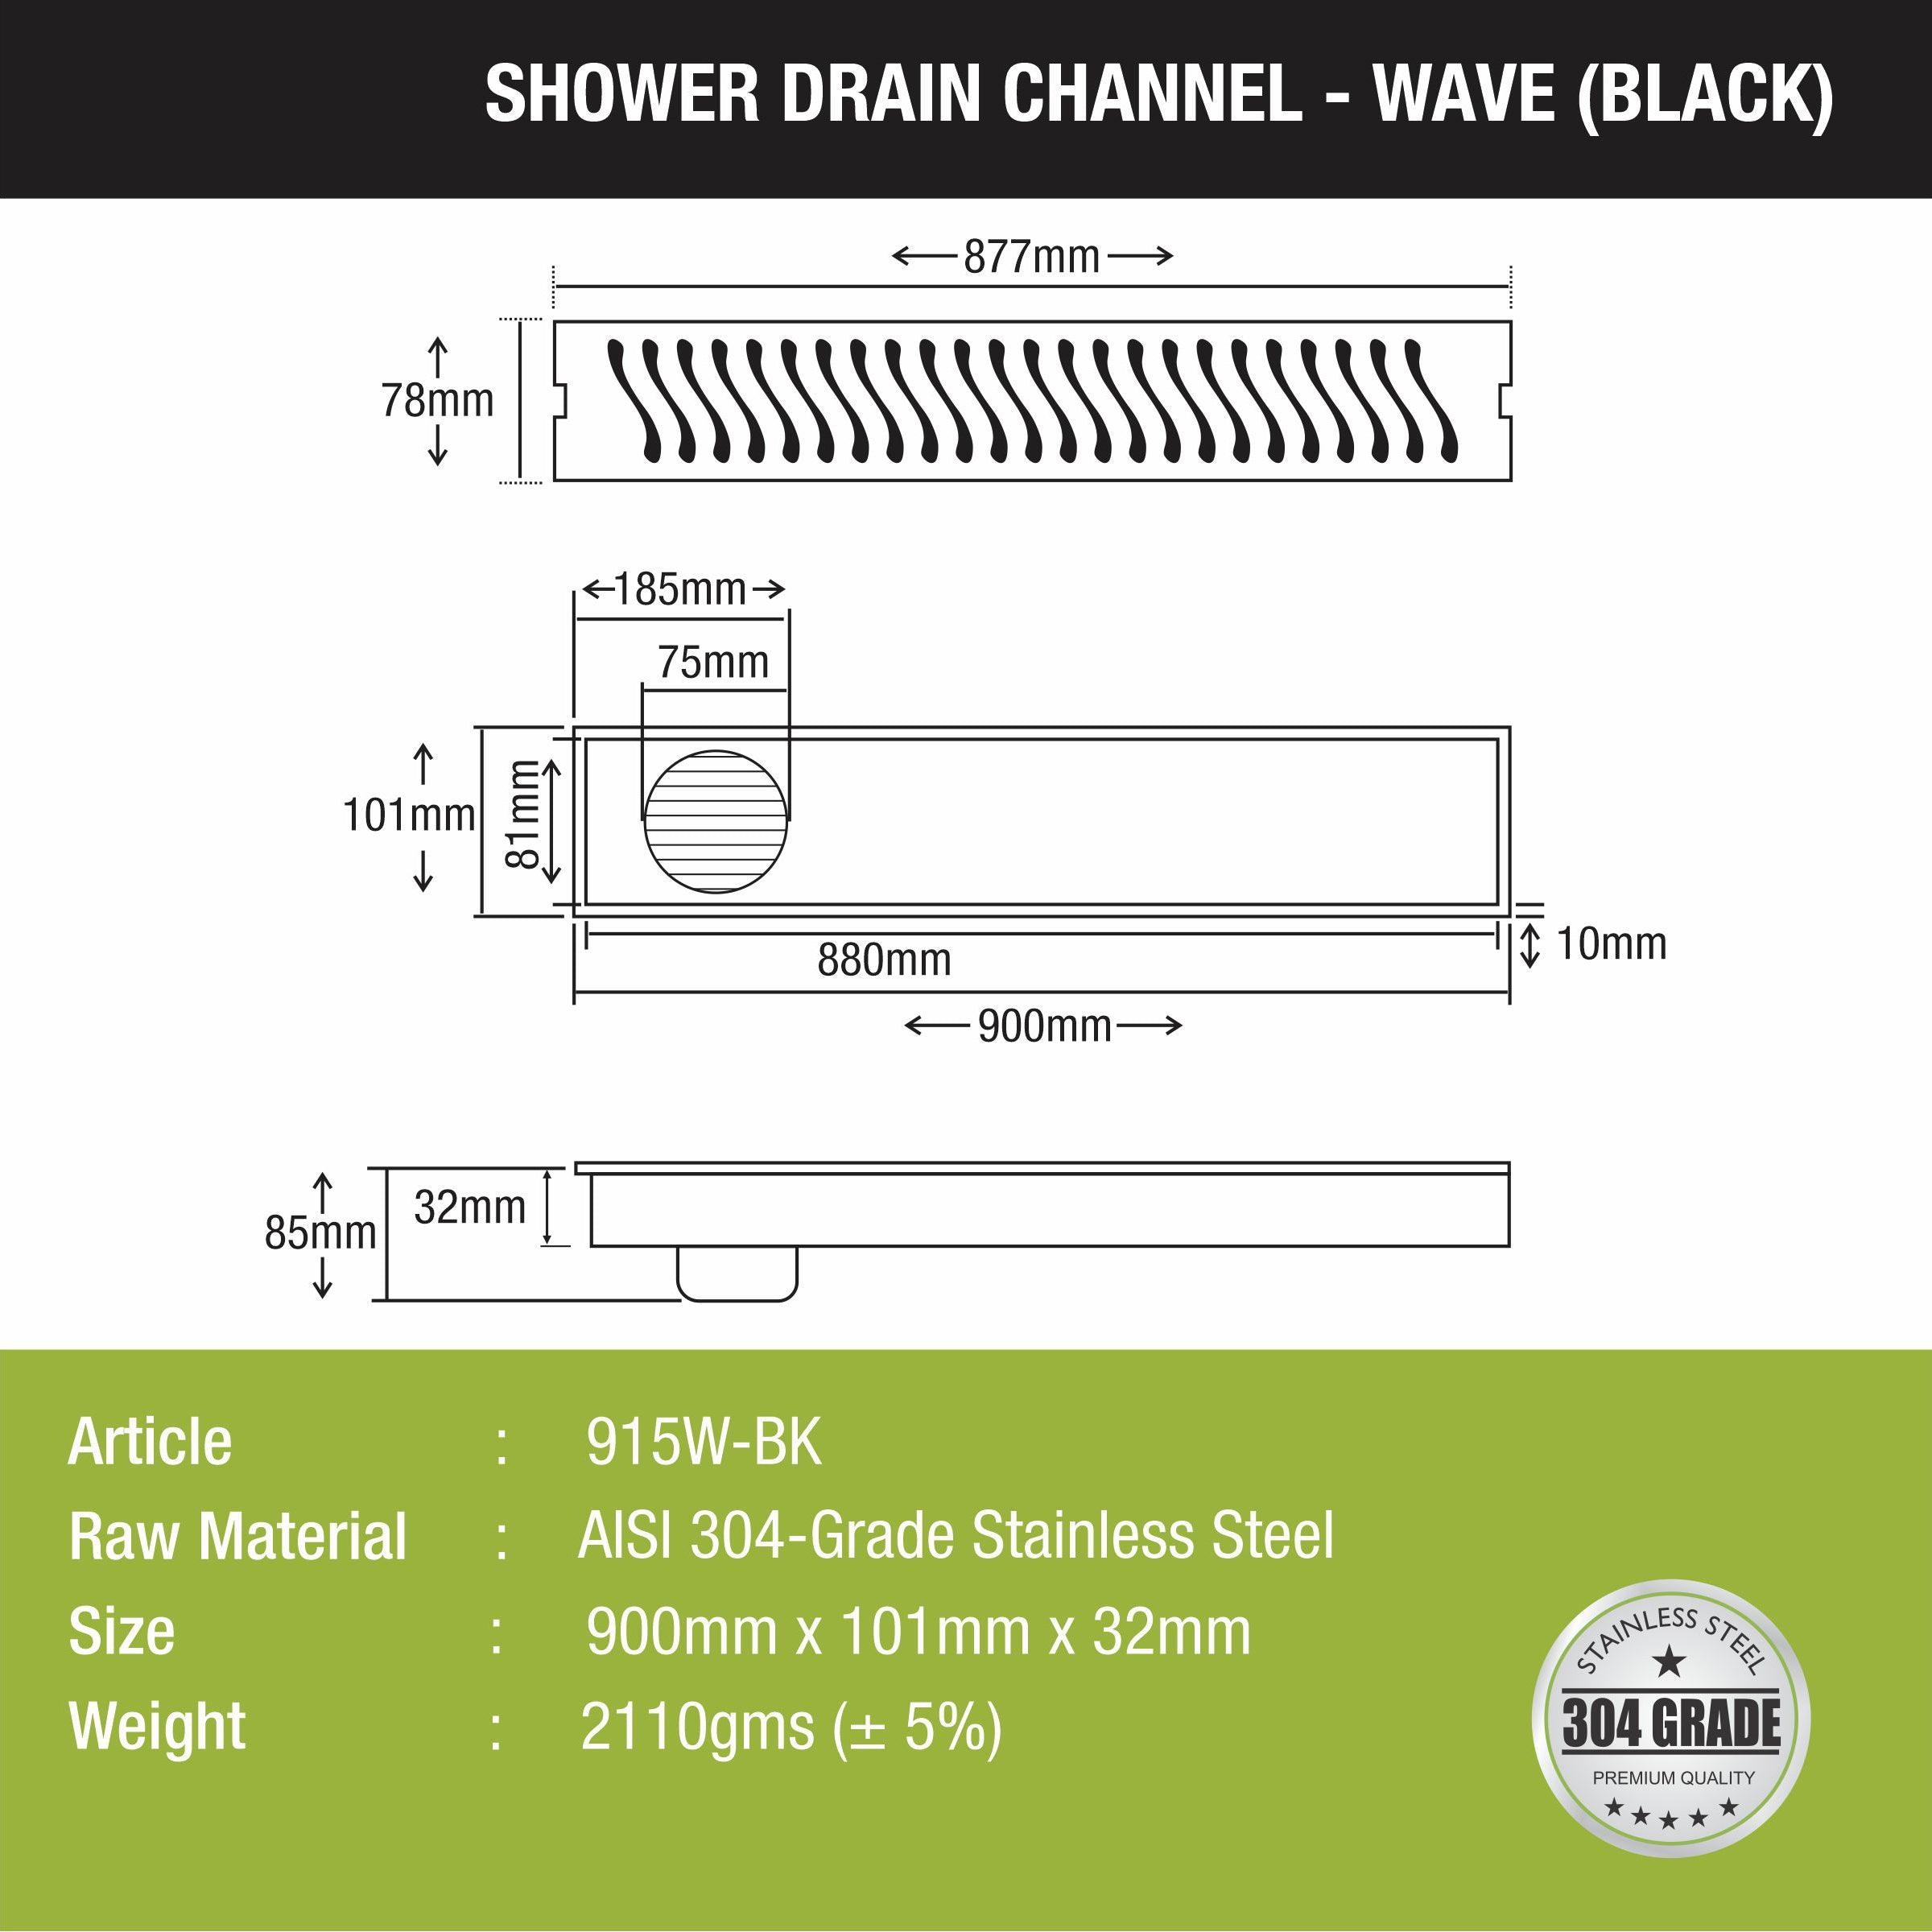 Wave Shower Drain Channel - Black (36 x 4 Inches) size and measurement